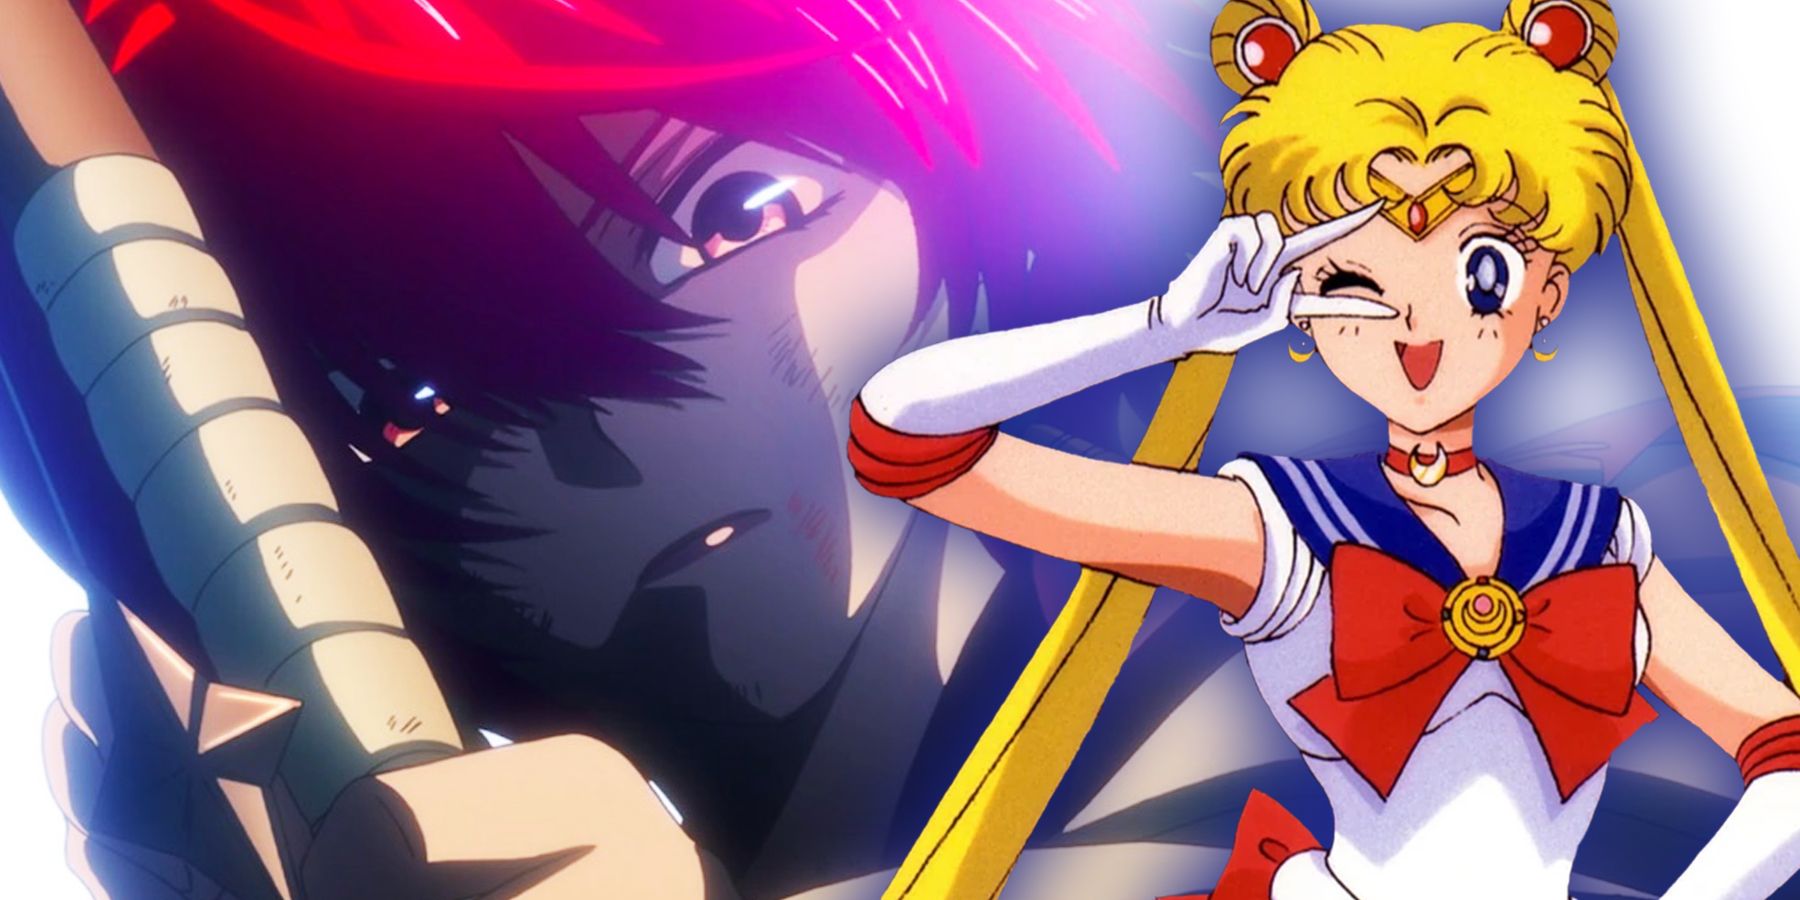 The Shaft Head Tilt & 9 Other Iconic Anime Poses